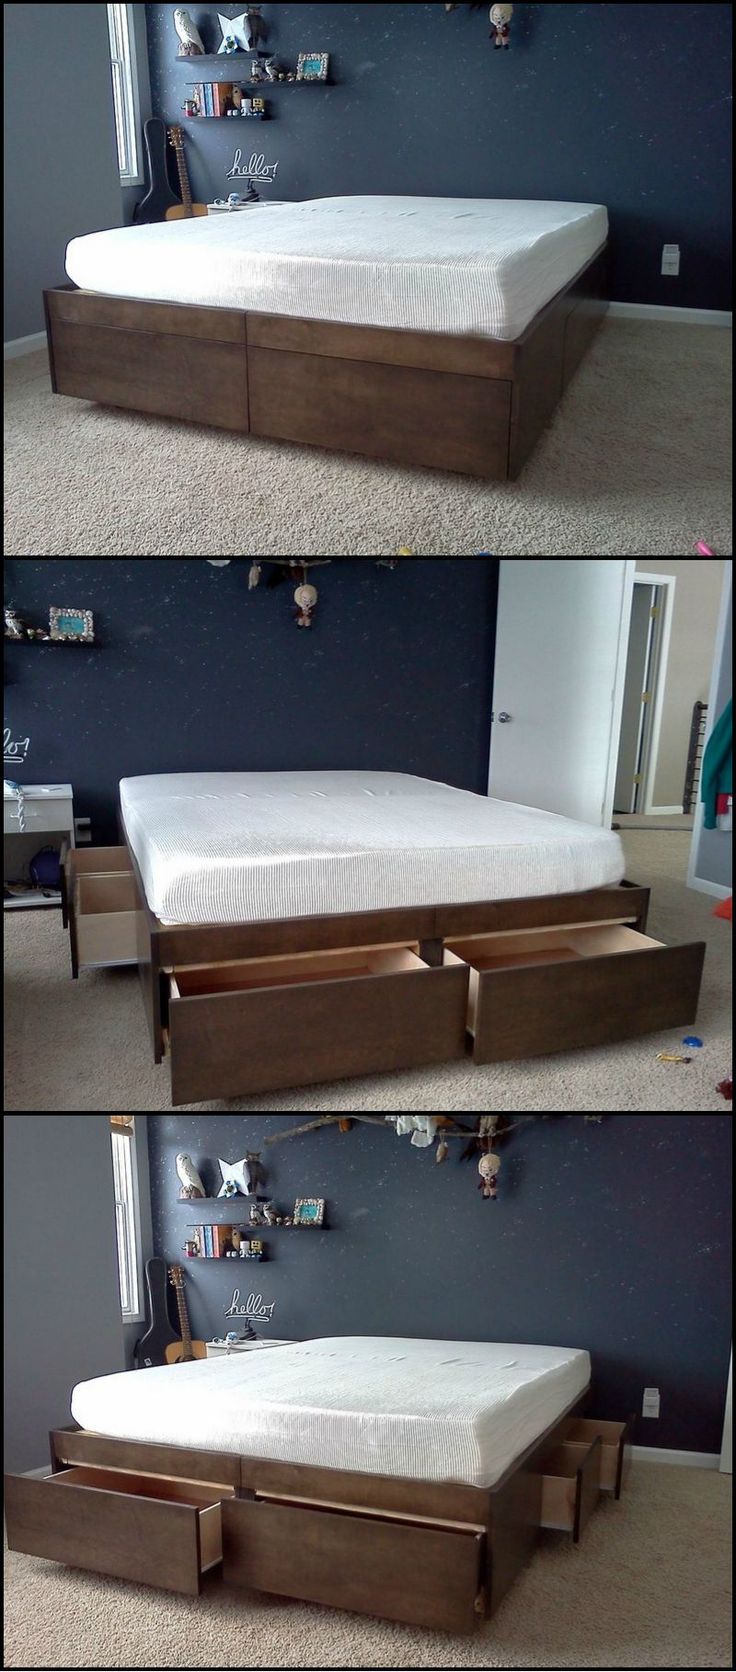 Do-It-Yourself Bed With Drawers